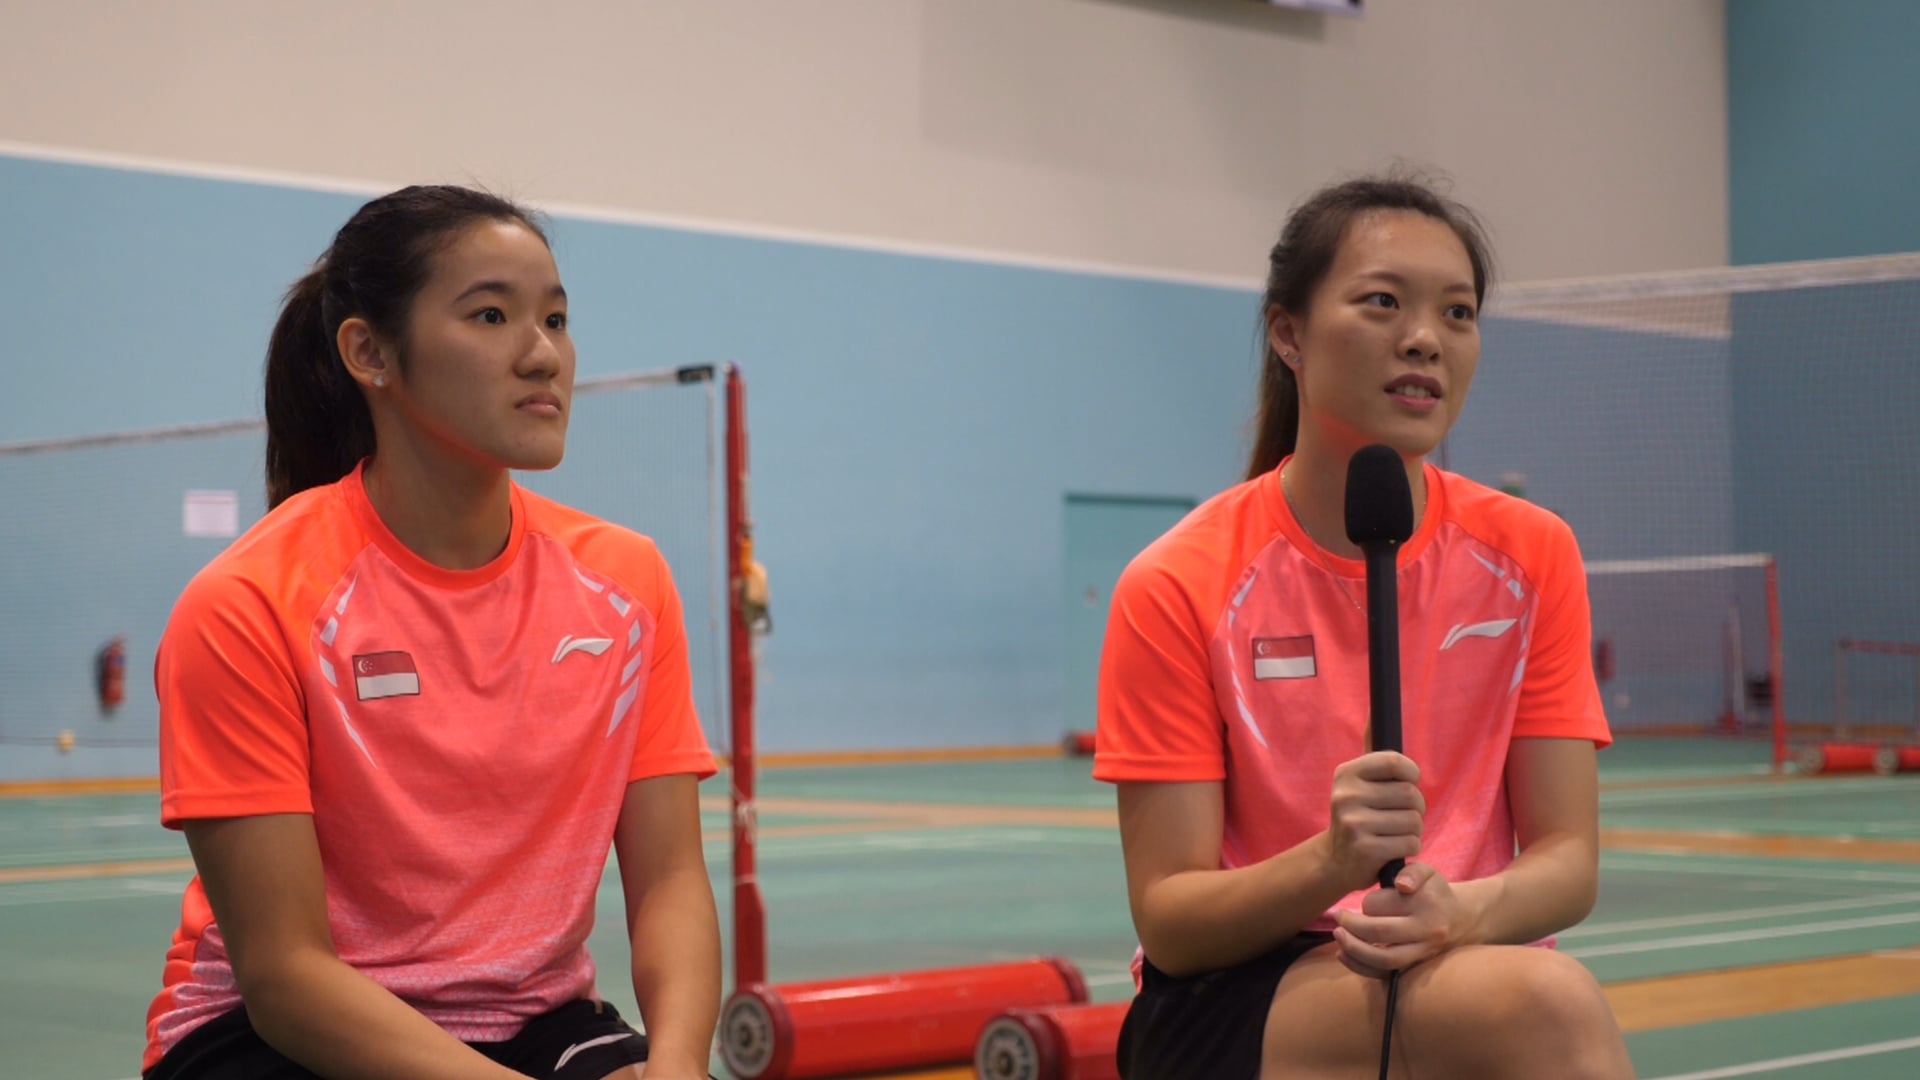 Badminton: Emerging Stronger with Doubles Pair Crystal Wong and Jin Yujia | Spotlight on Team Singapore